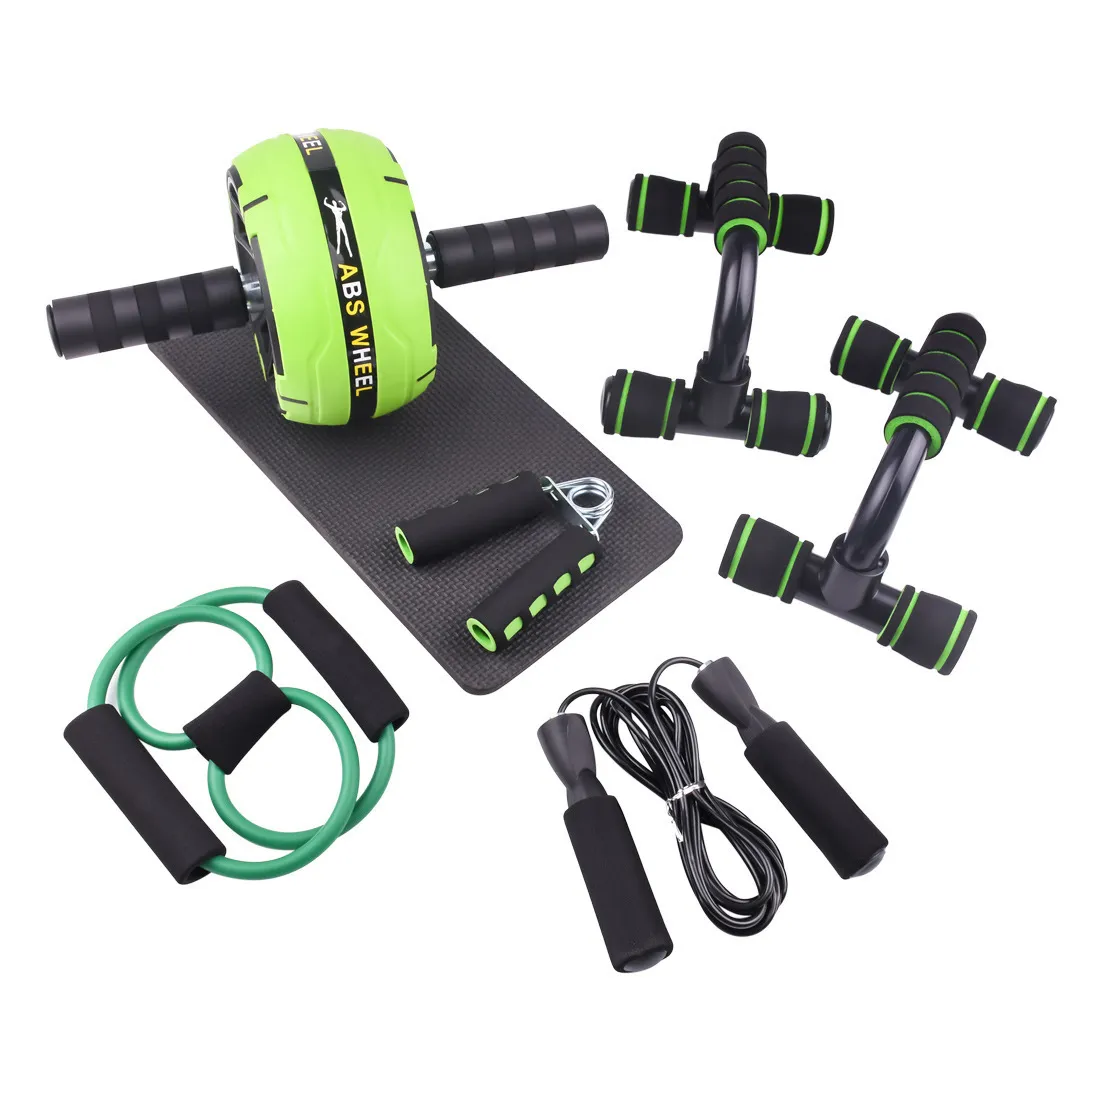 Core Abdominal Trainers 7 IN 1 AB Wheel Strength Training Ab Exercise Wheels Kit avec bandes de résistance Push Up Bars Jump Rope Knee Mat Home 230617